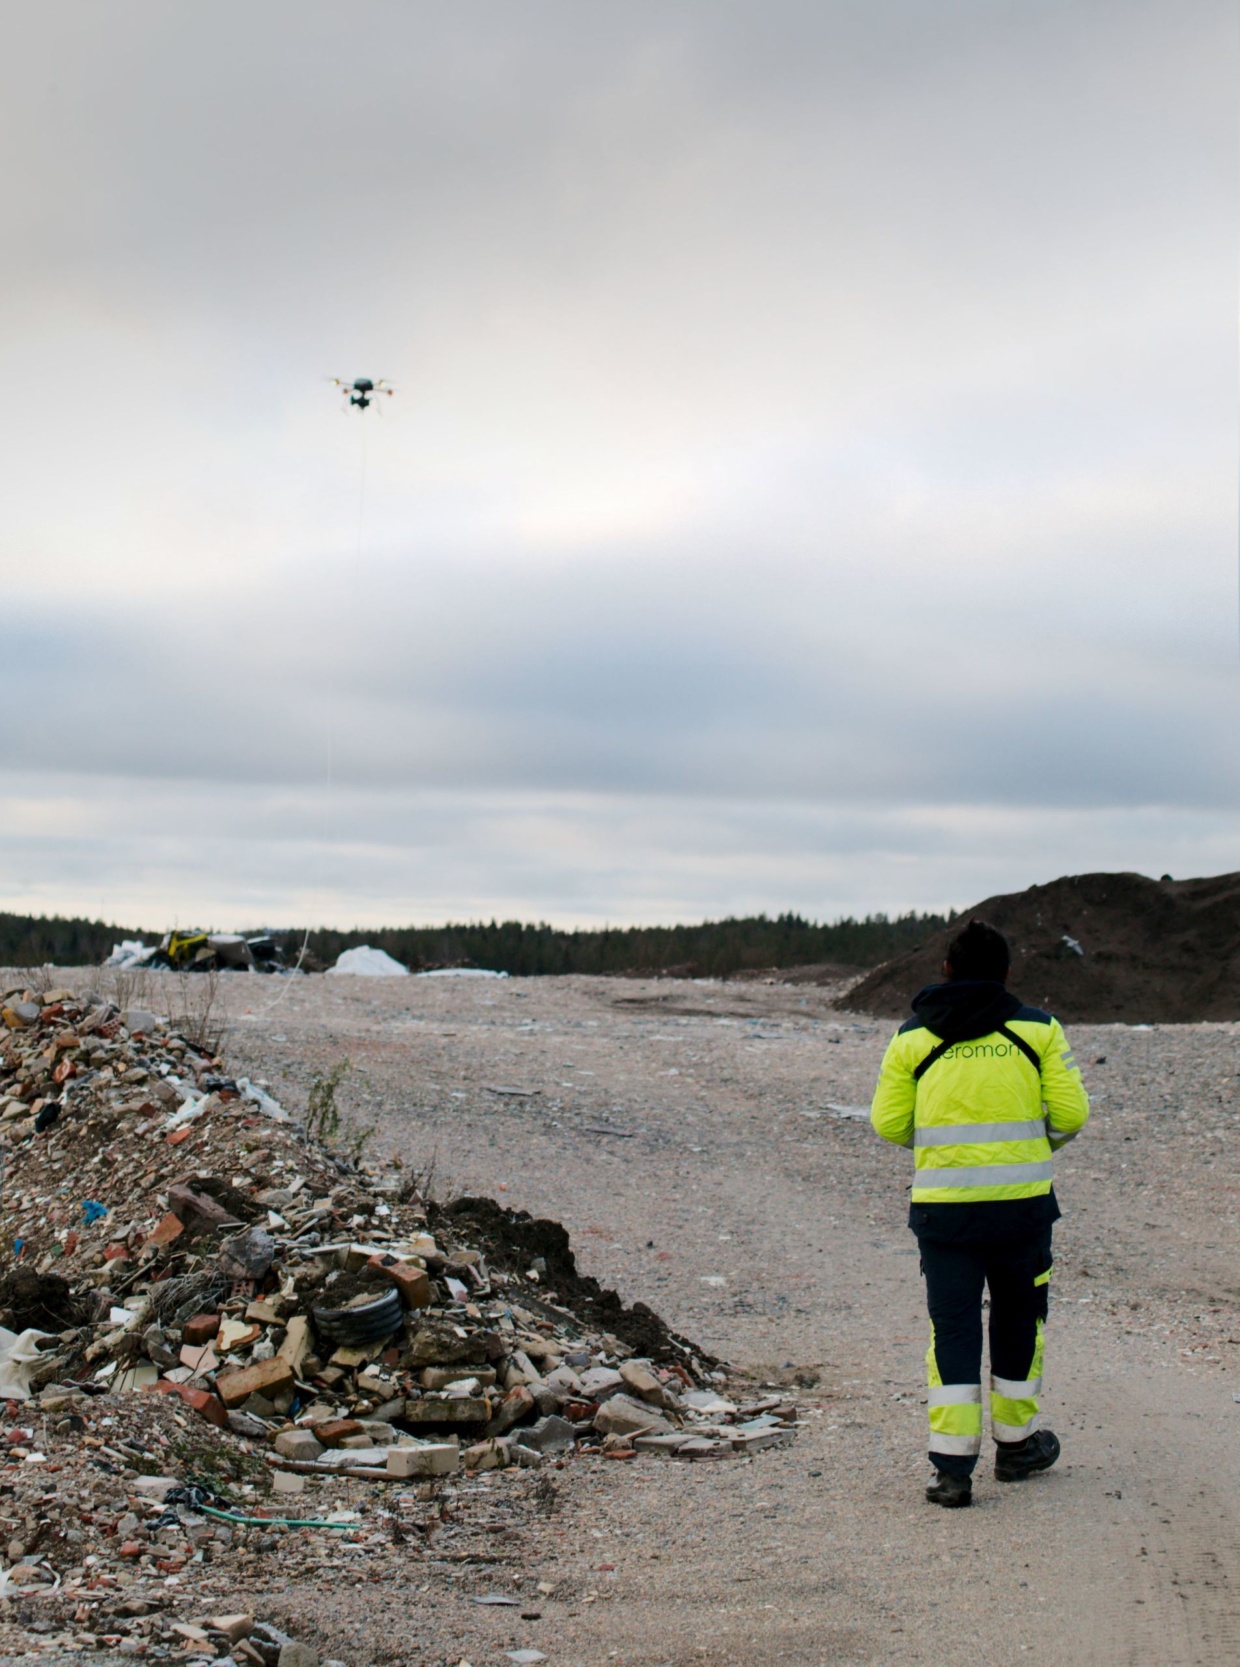 A drone flying above a landfill with a BH-12 device and a long sampling line.